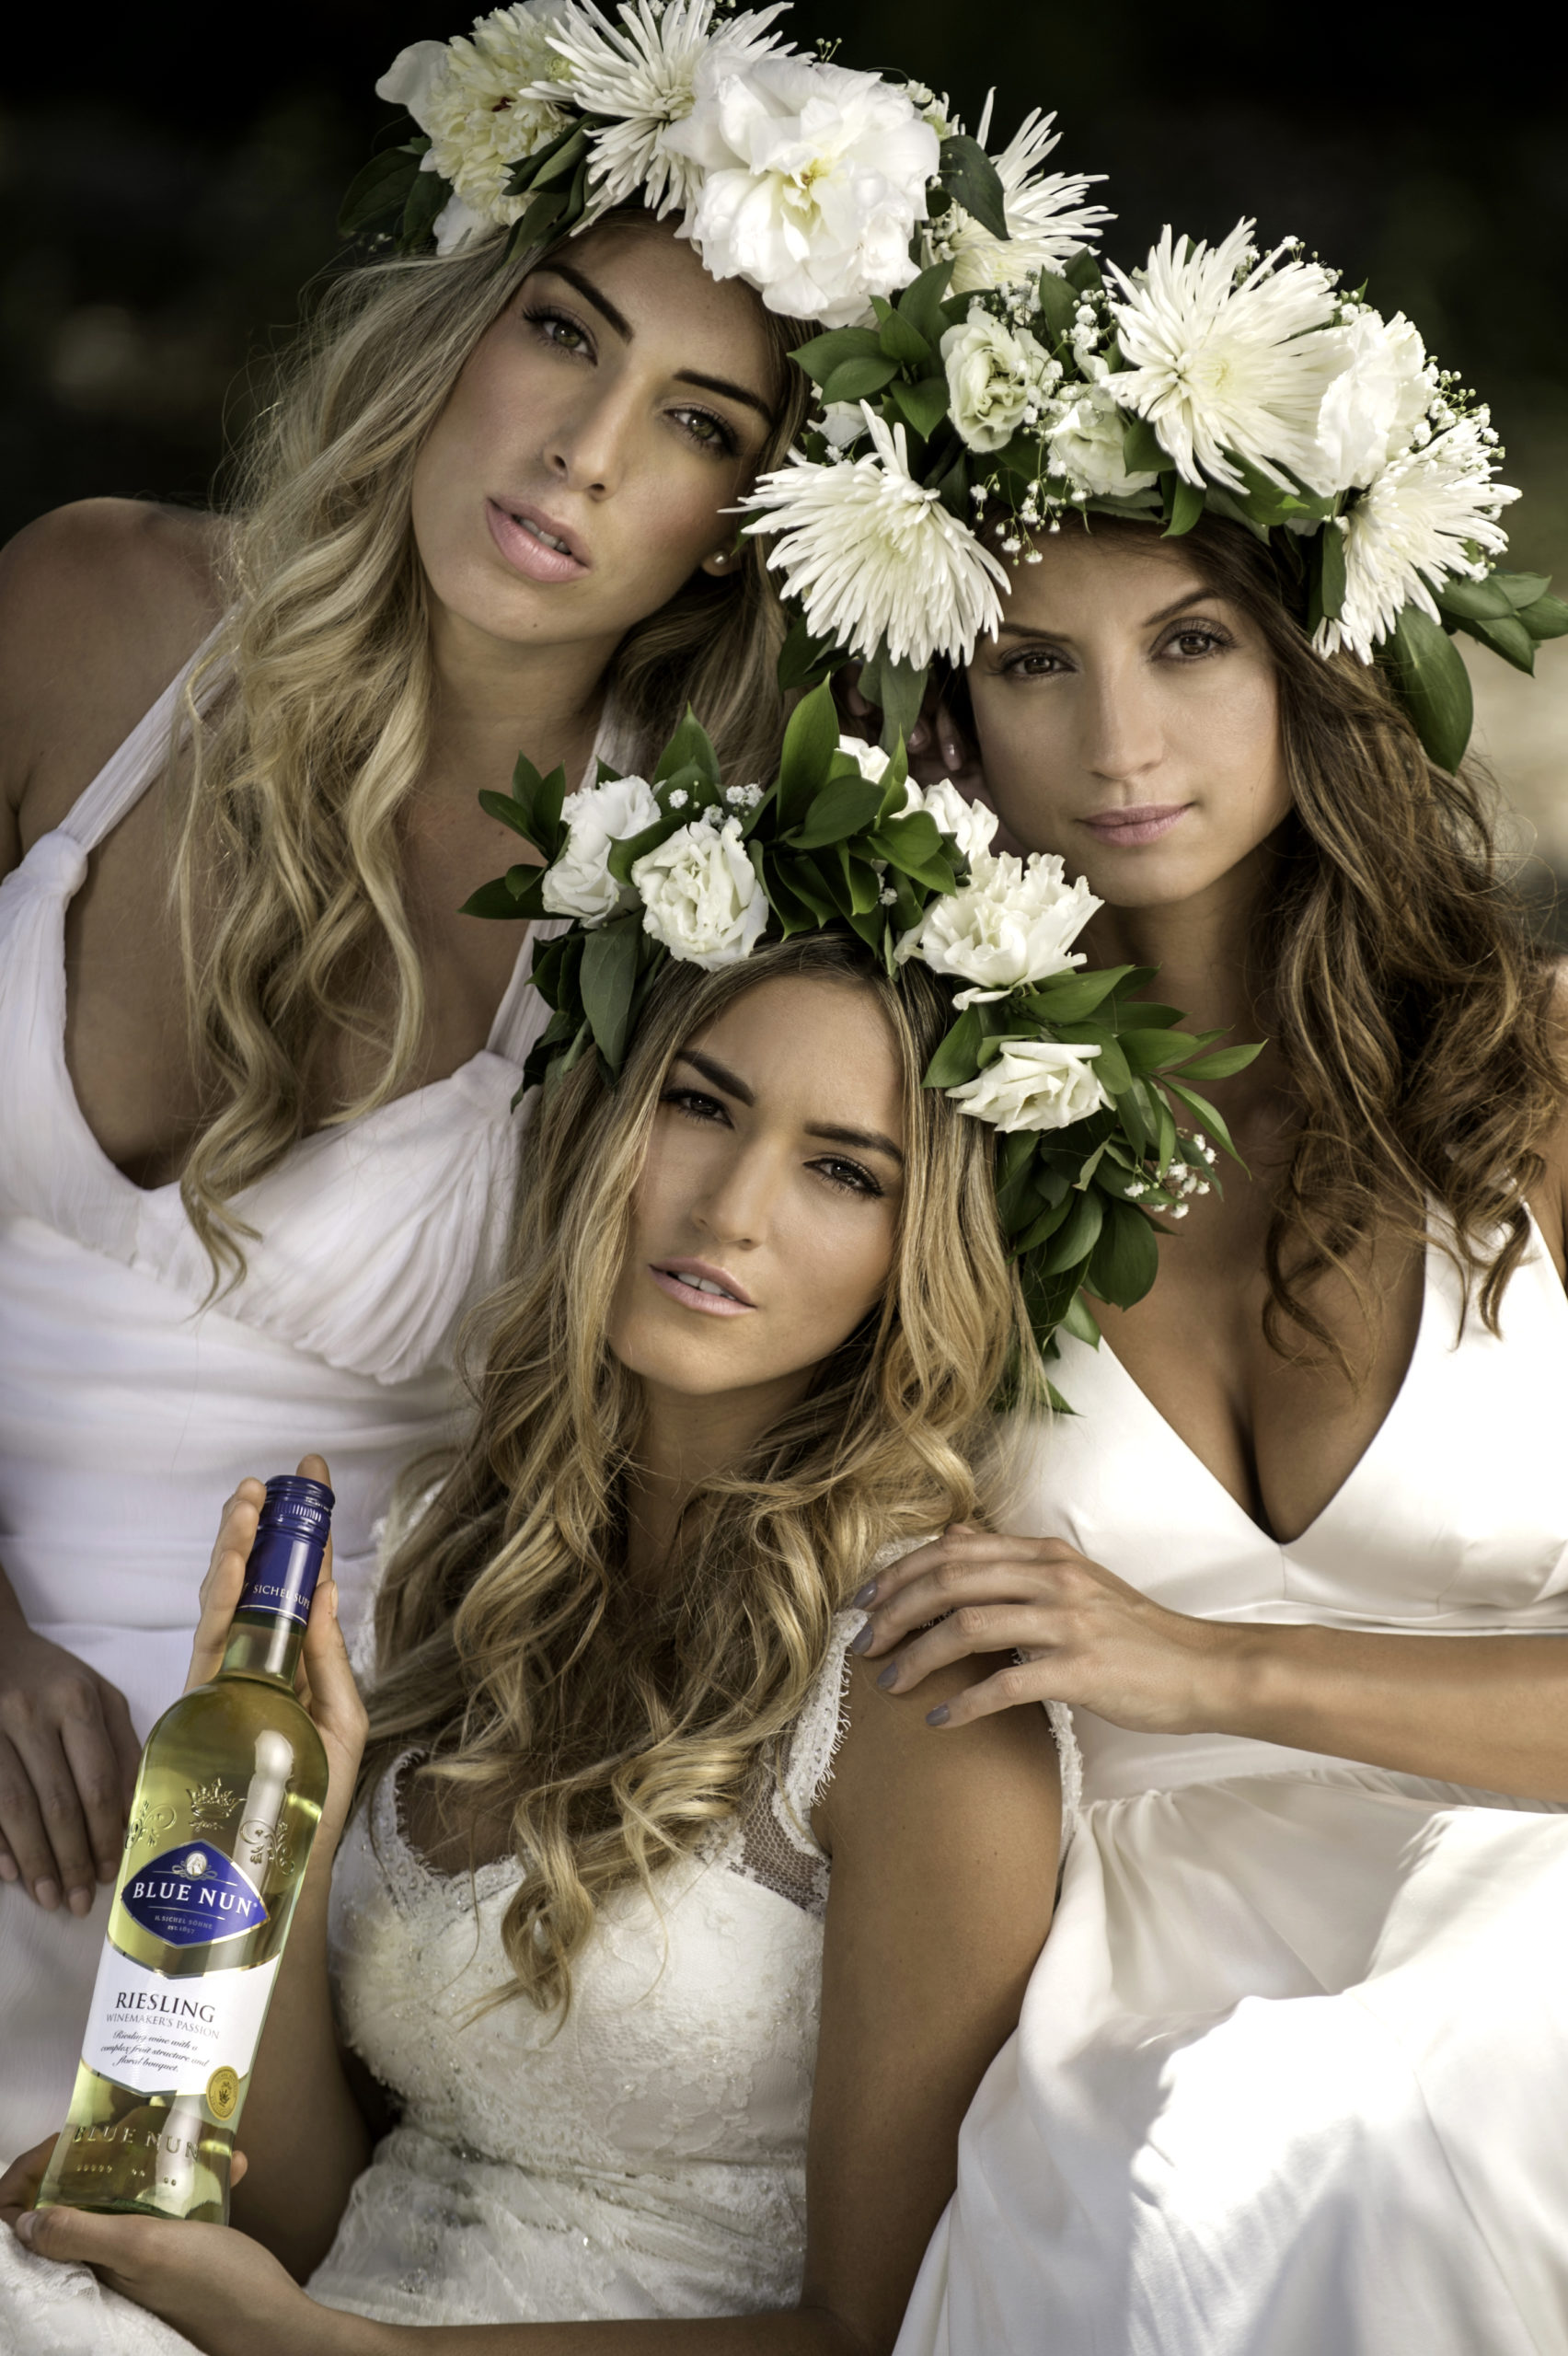 Three women wearing flower headdresses posing for the camera wearing white dressing gowns with one holding a bottle of Riesling wine